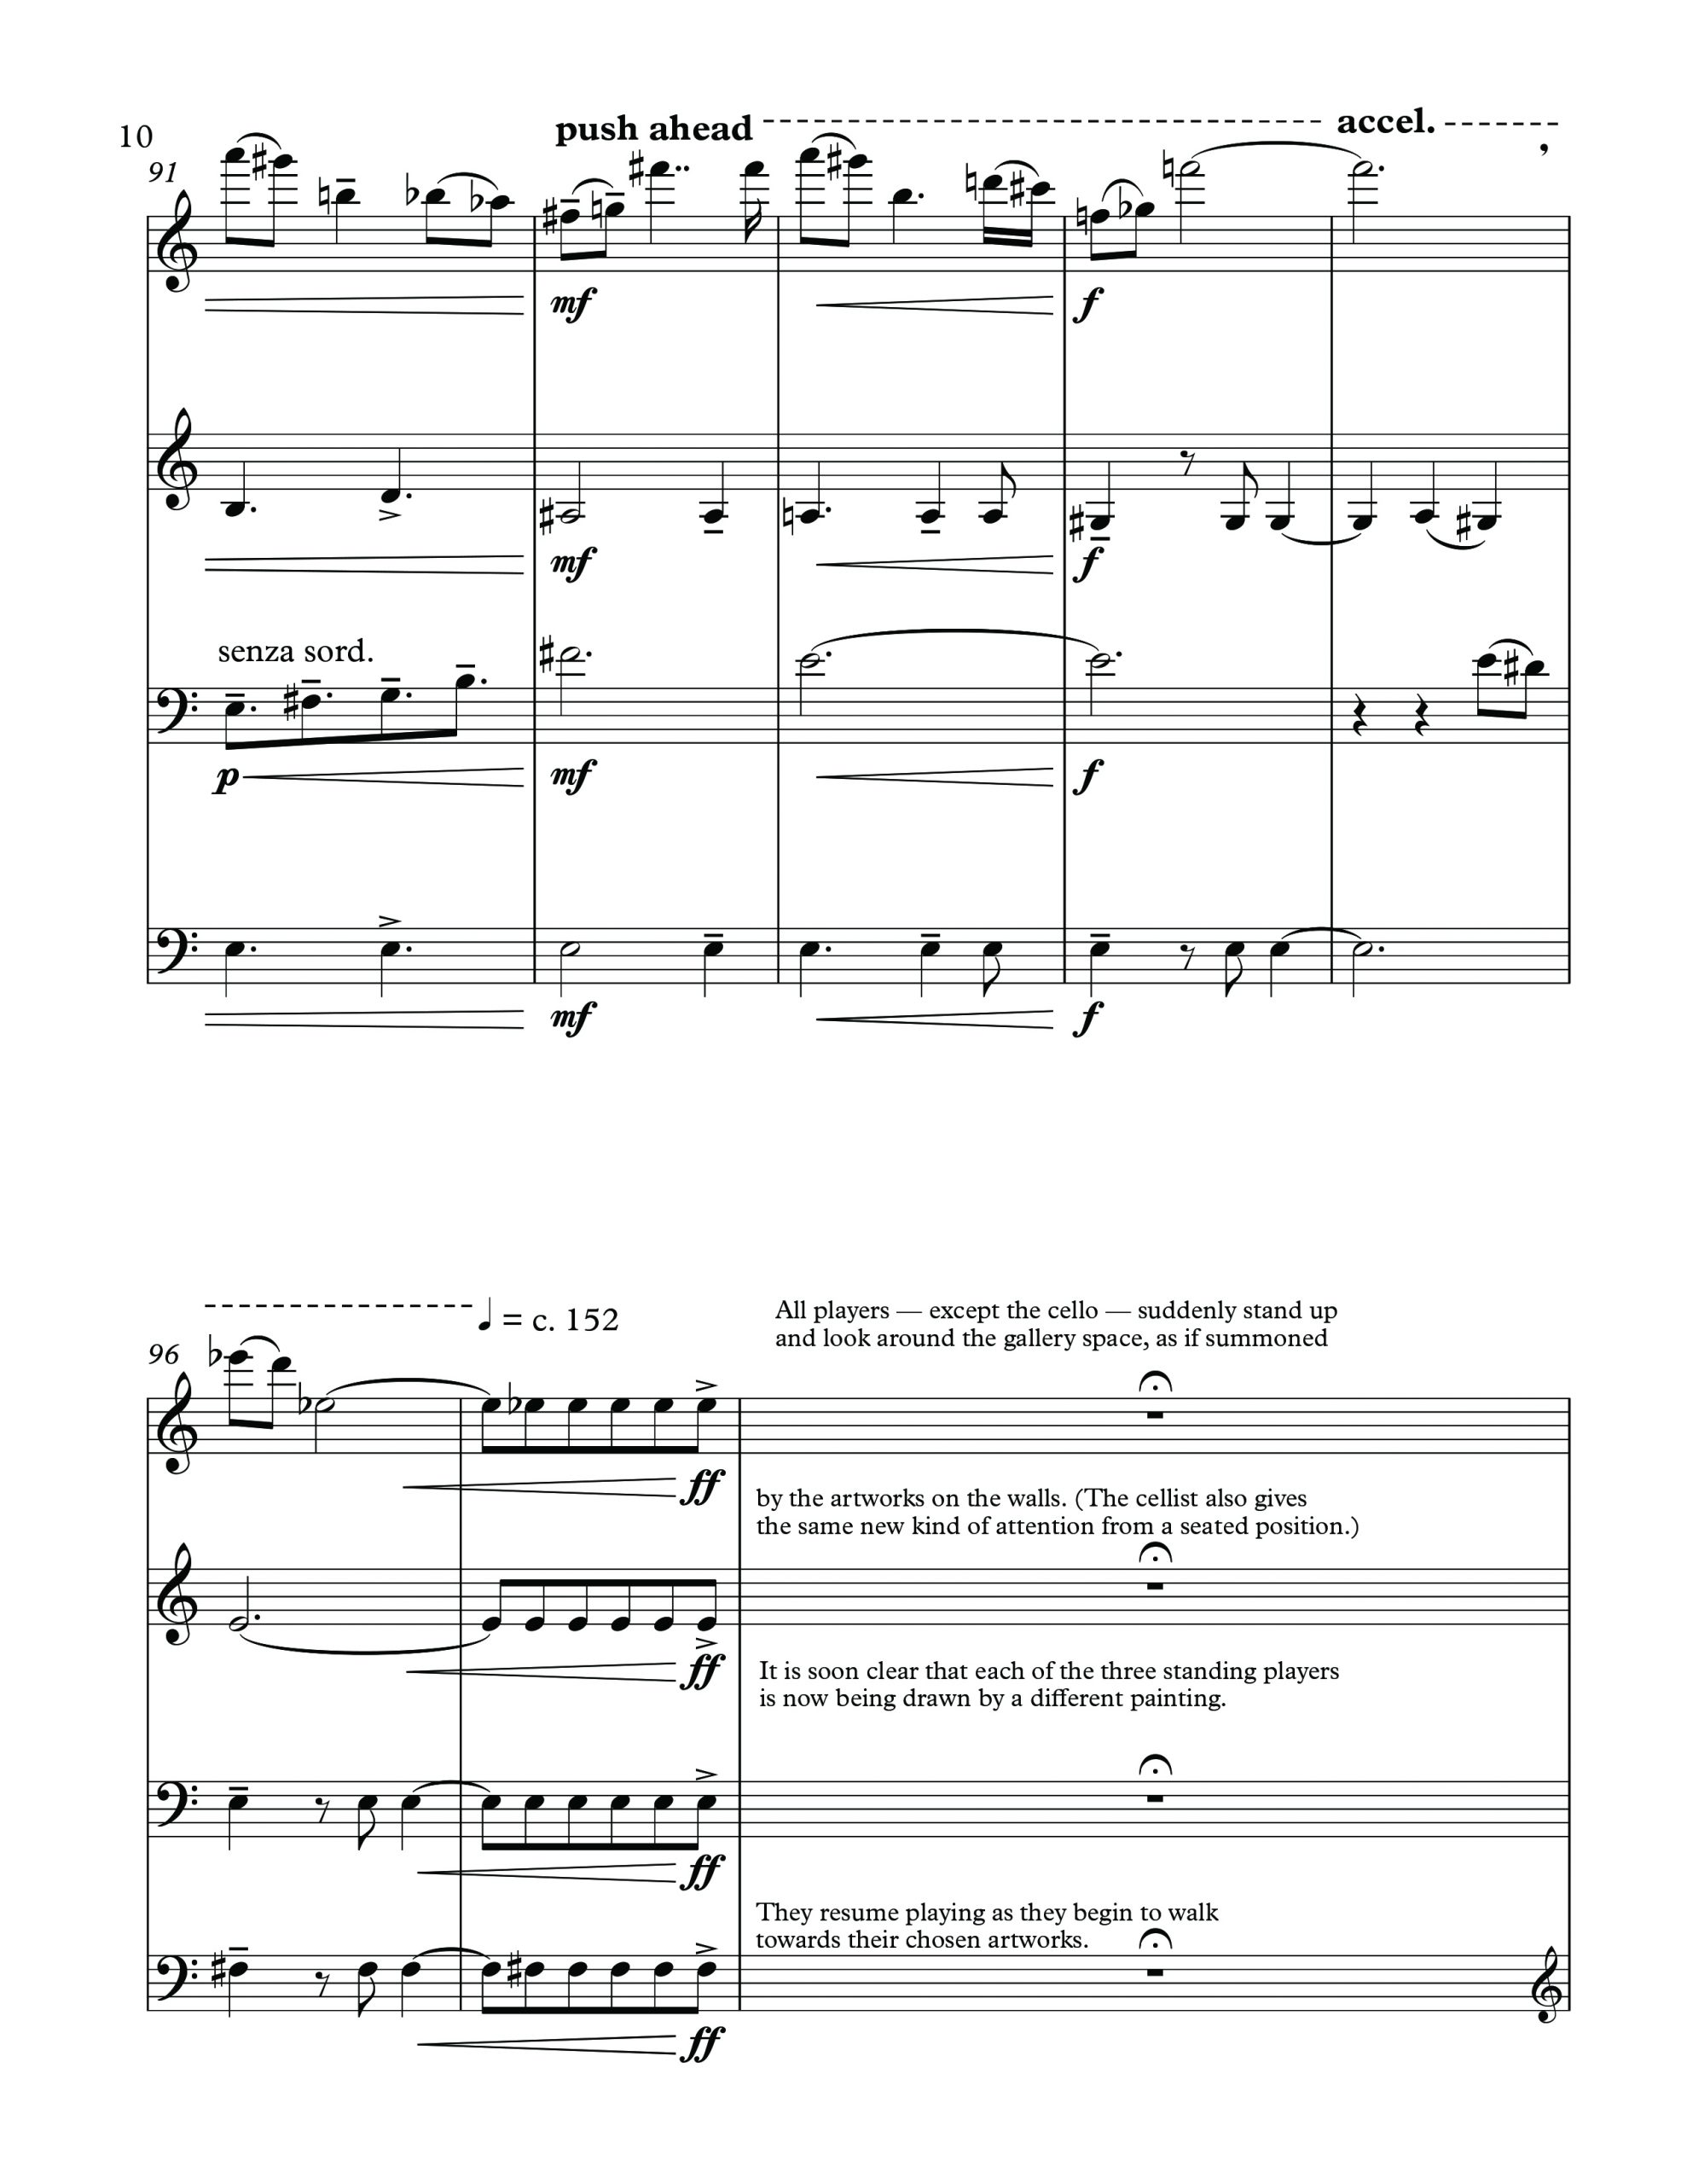 Musical score by Michael Alec Rose (excerpt)